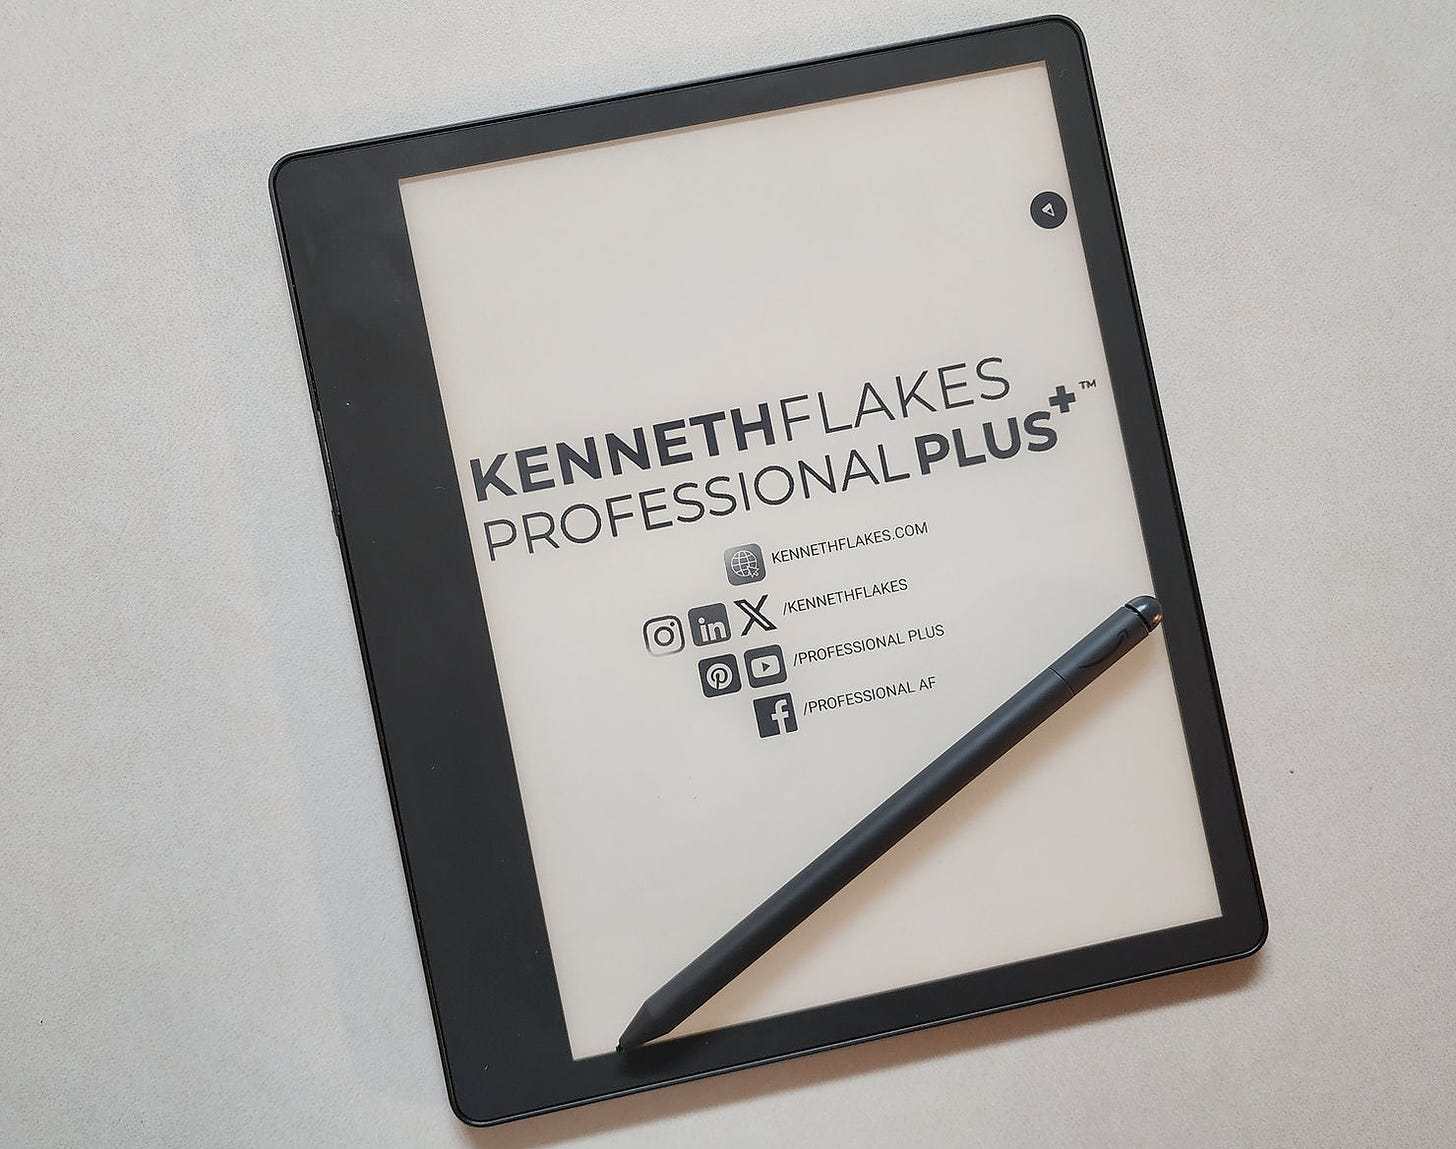 Kindle Scribe Tablet with the Kenneth Flakes Professional Plus logo and social media  